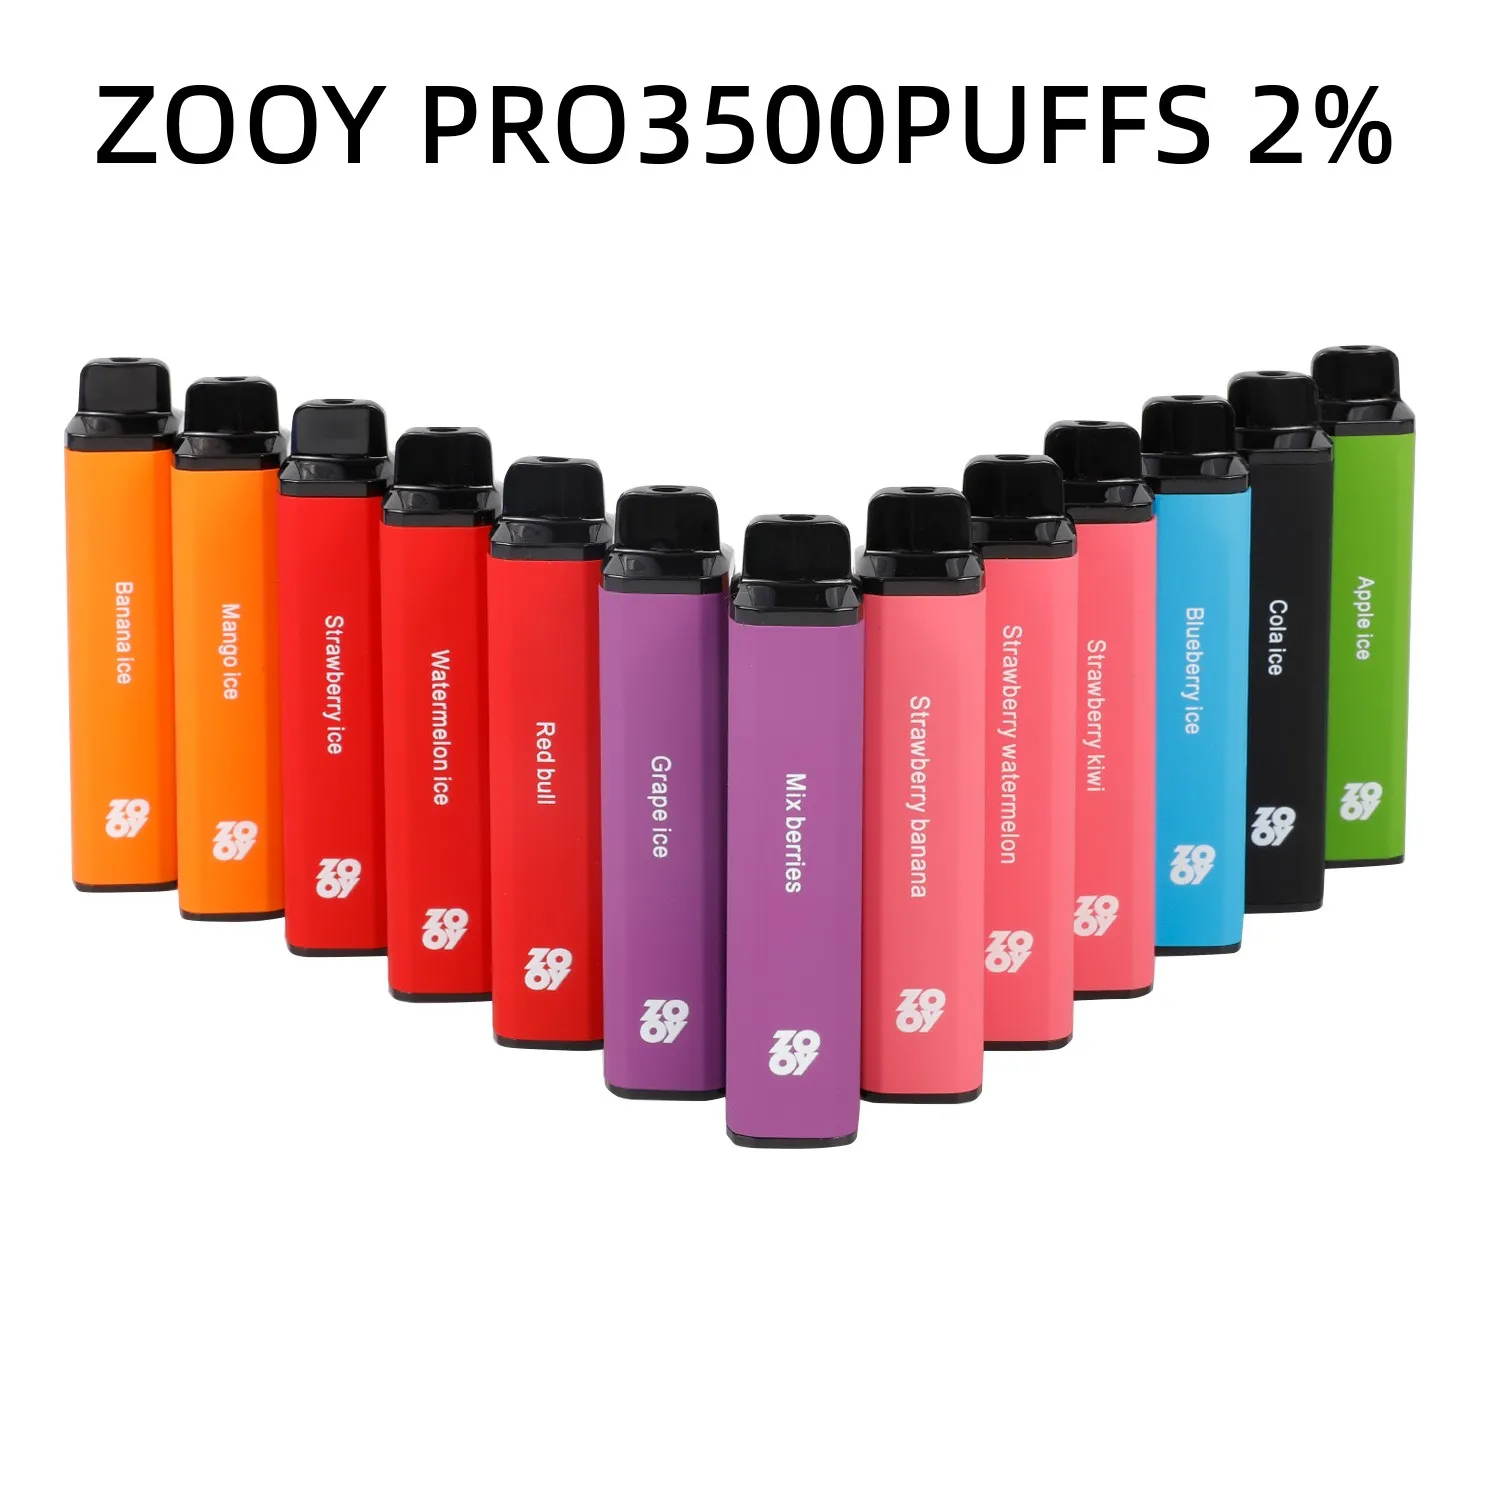 Zooy Legend 3500 Puffs eタバコ使い捨て蒸気ペンメッシュコイル2％パフ3500 650MAH気化器スティック蒸気キット